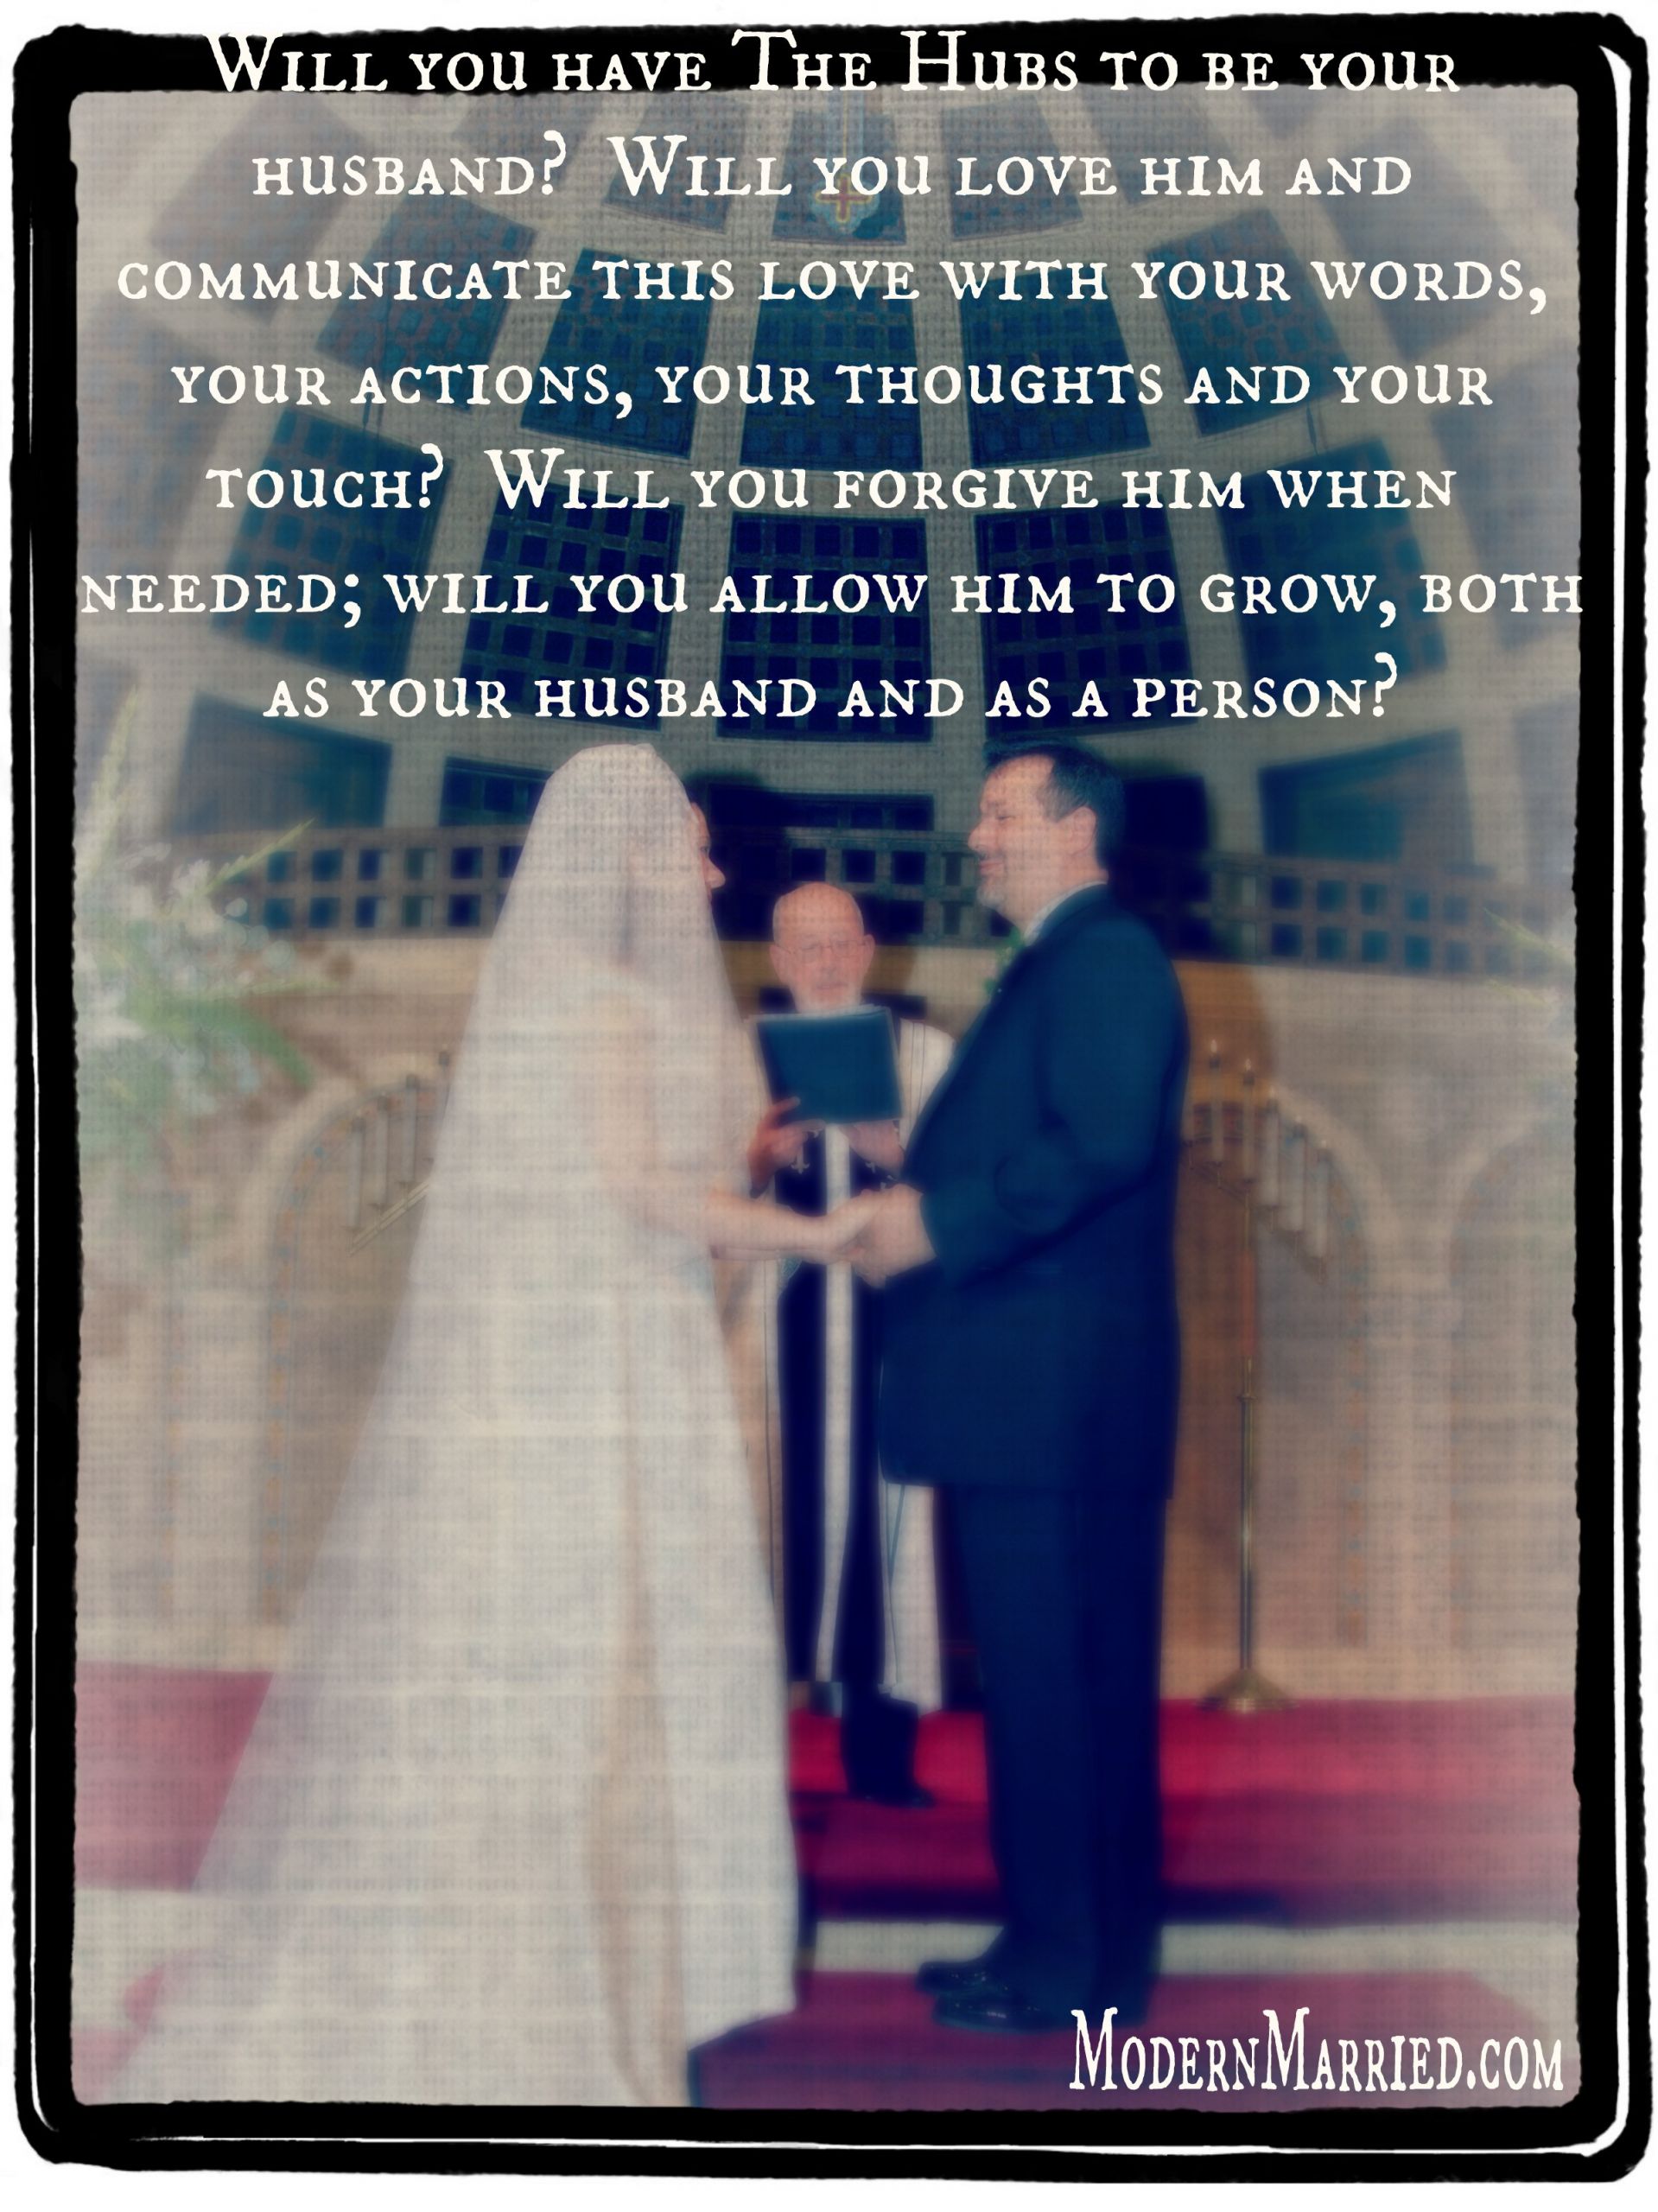 Best Wedding Vows From Movies
 Marriage Vows and Movie Vows – Are You Living What You